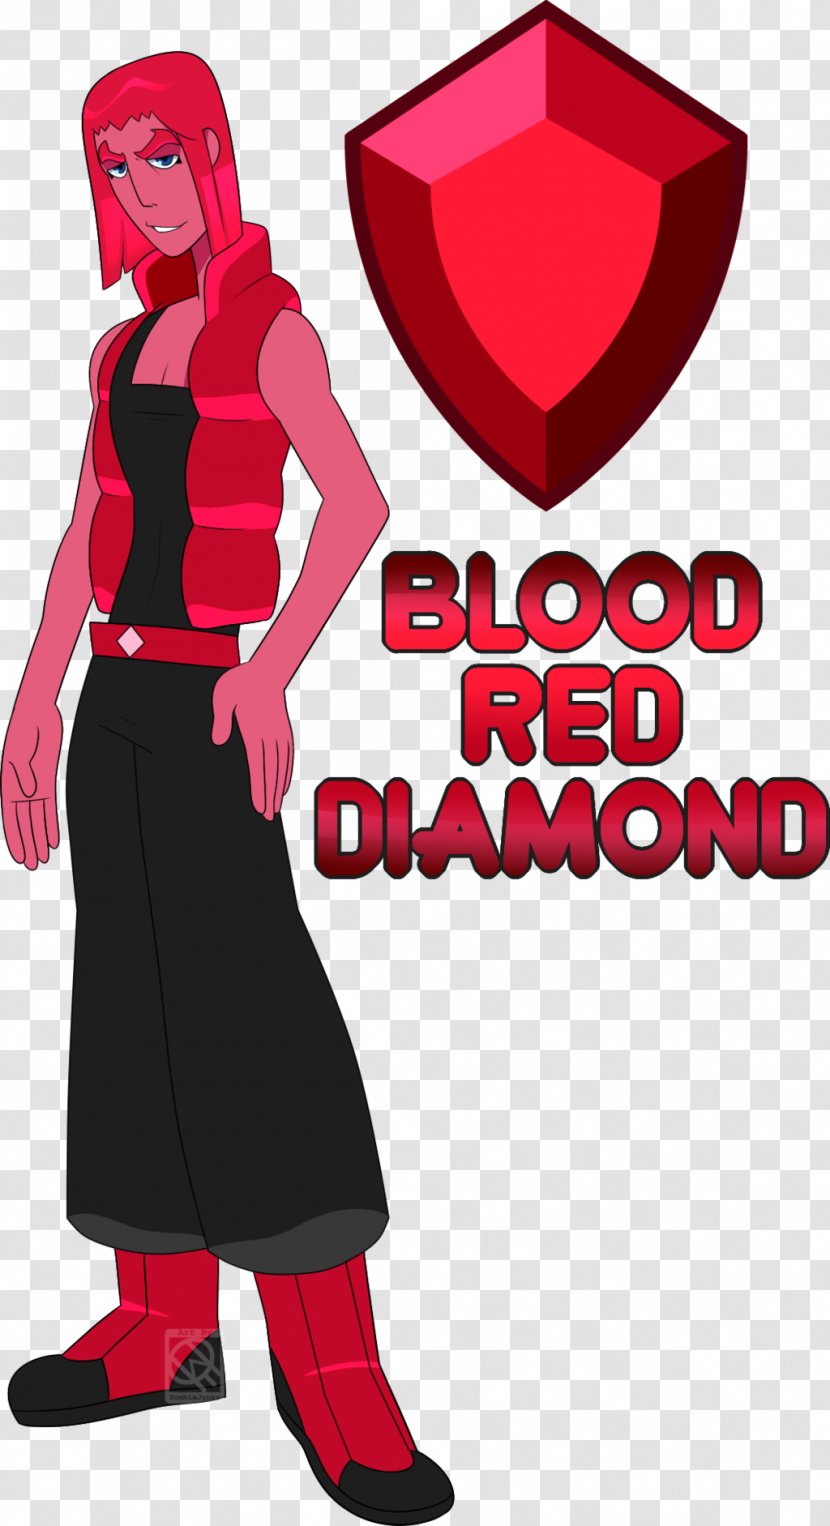 Red Diamond Blood Art - Fictional Character Transparent PNG